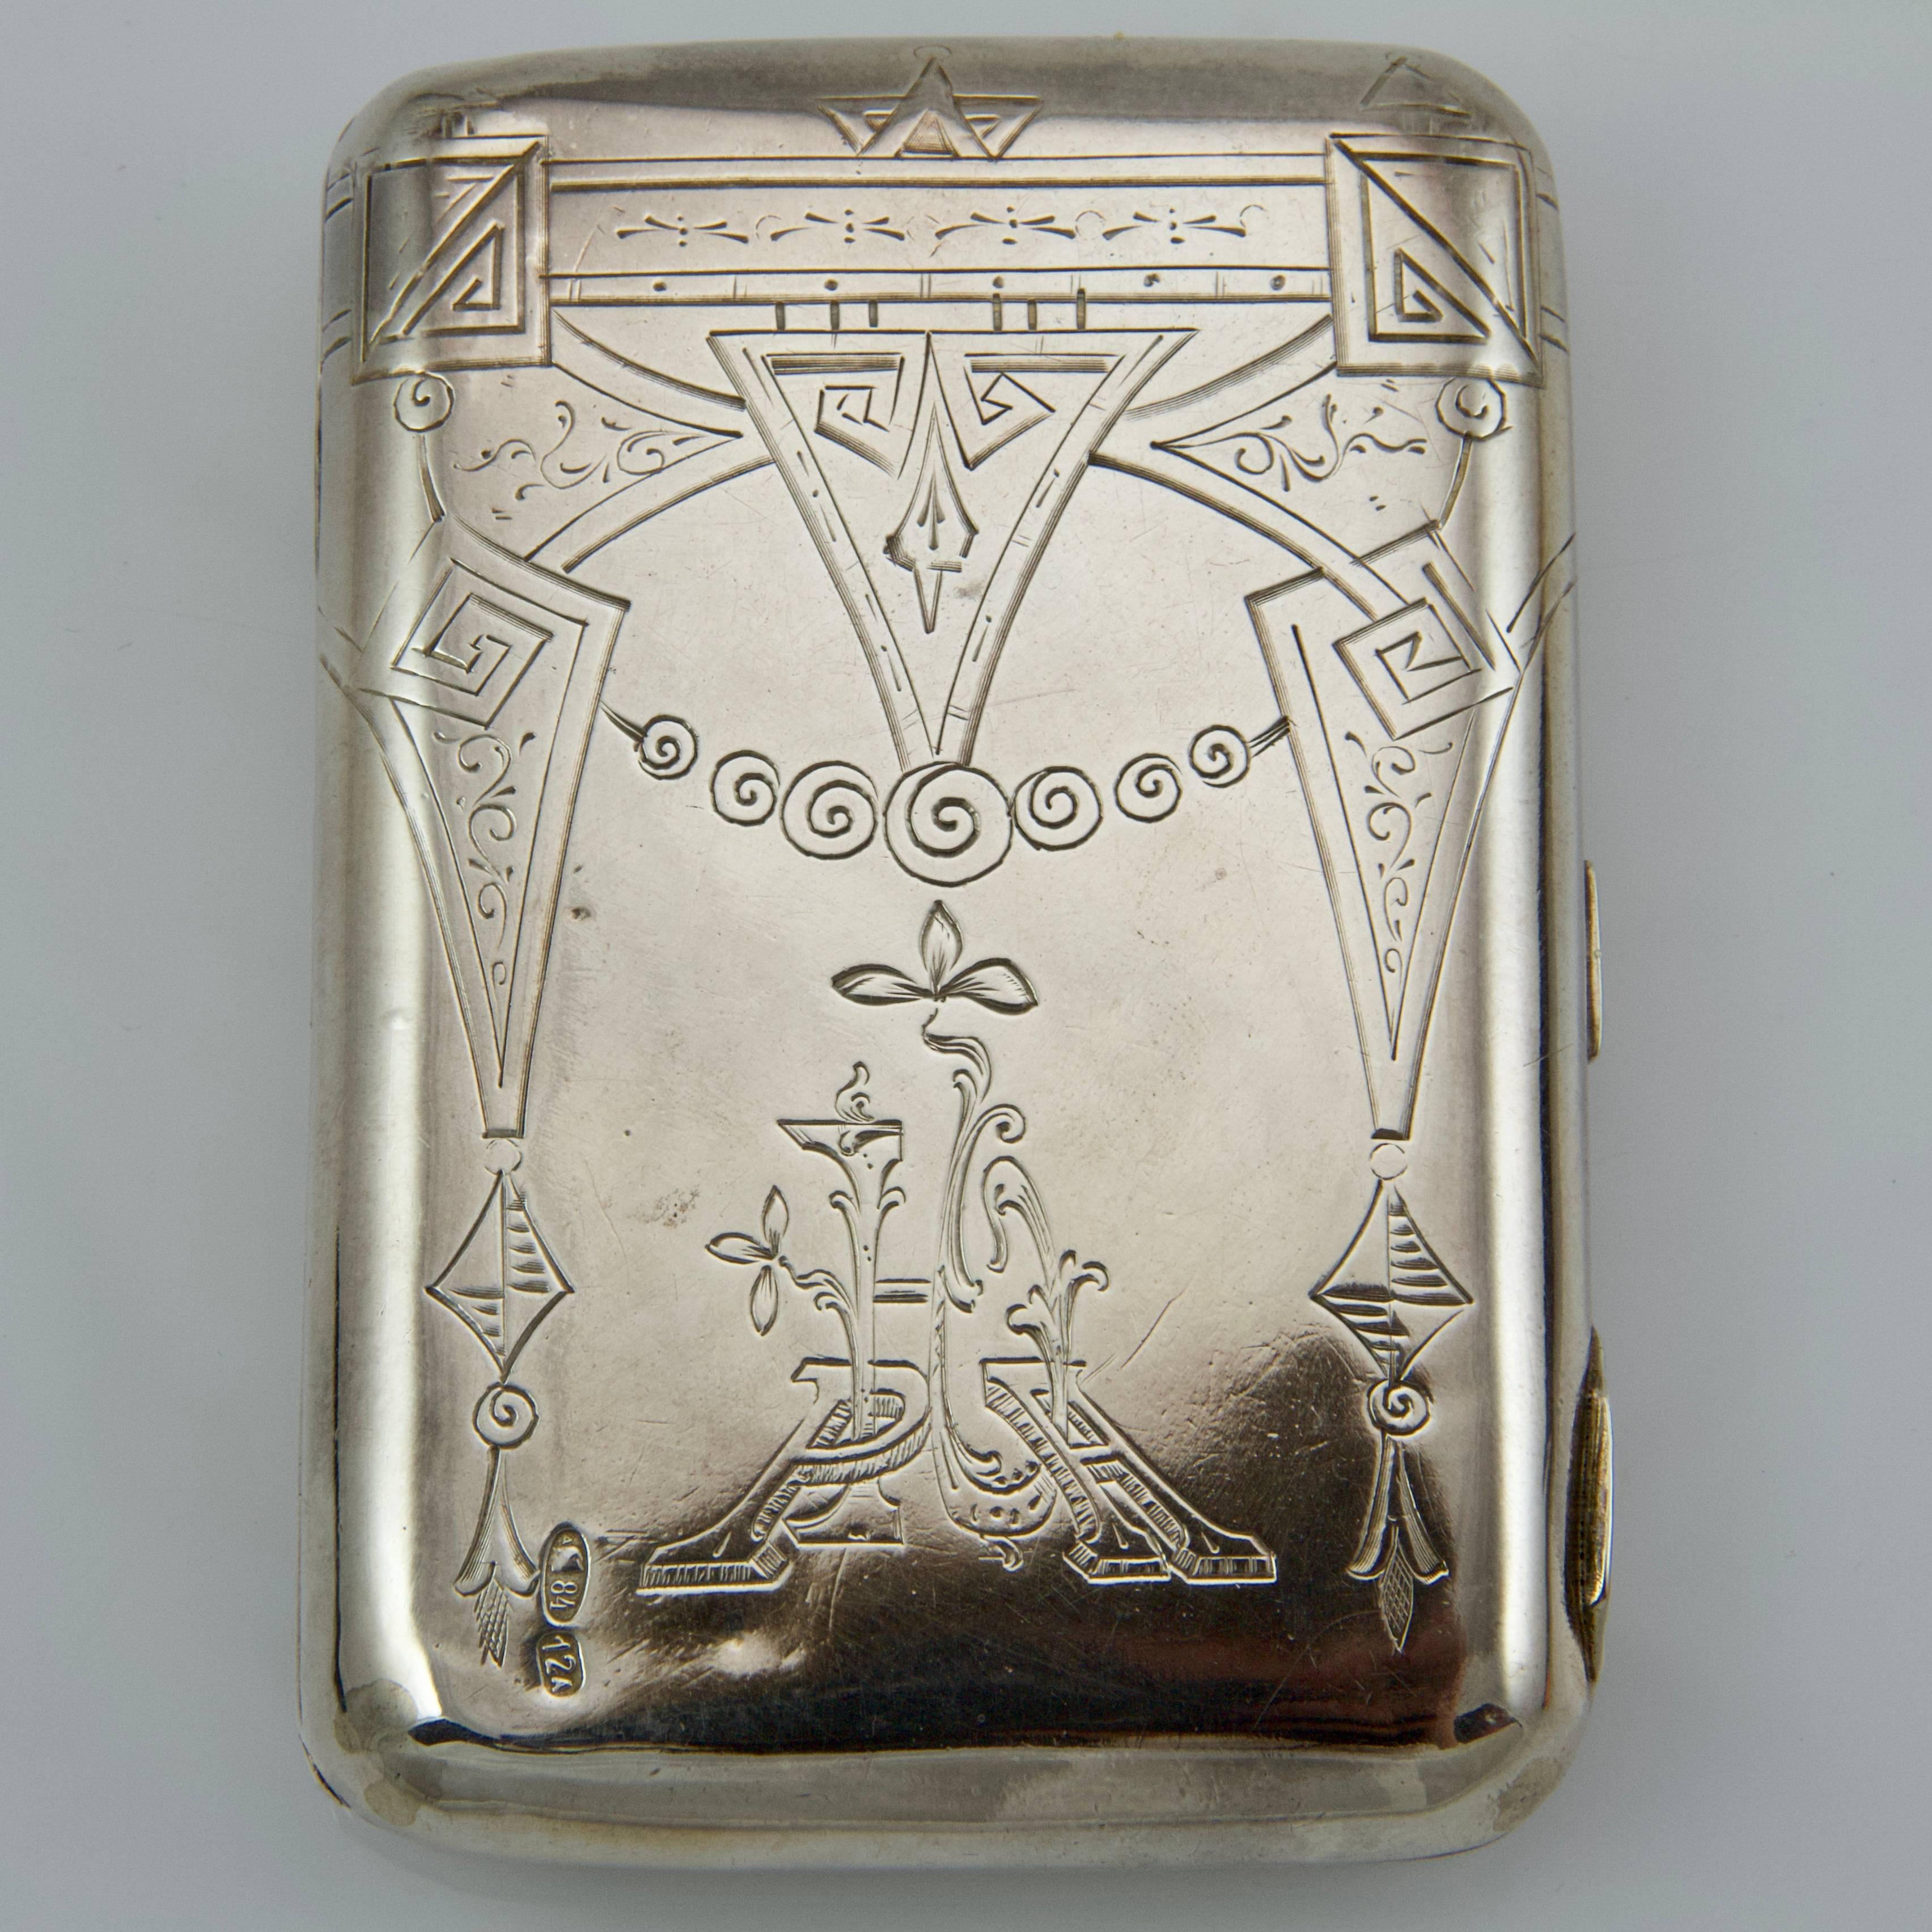 Very simple cigarette case in silver sterling. Lid presents a typical Art Nouveau pattern with a cyrillic cipher N.R.A.
Back totally hand-engraved with a poem begining by a famous citation of Seneque in his letter to Lucilius 